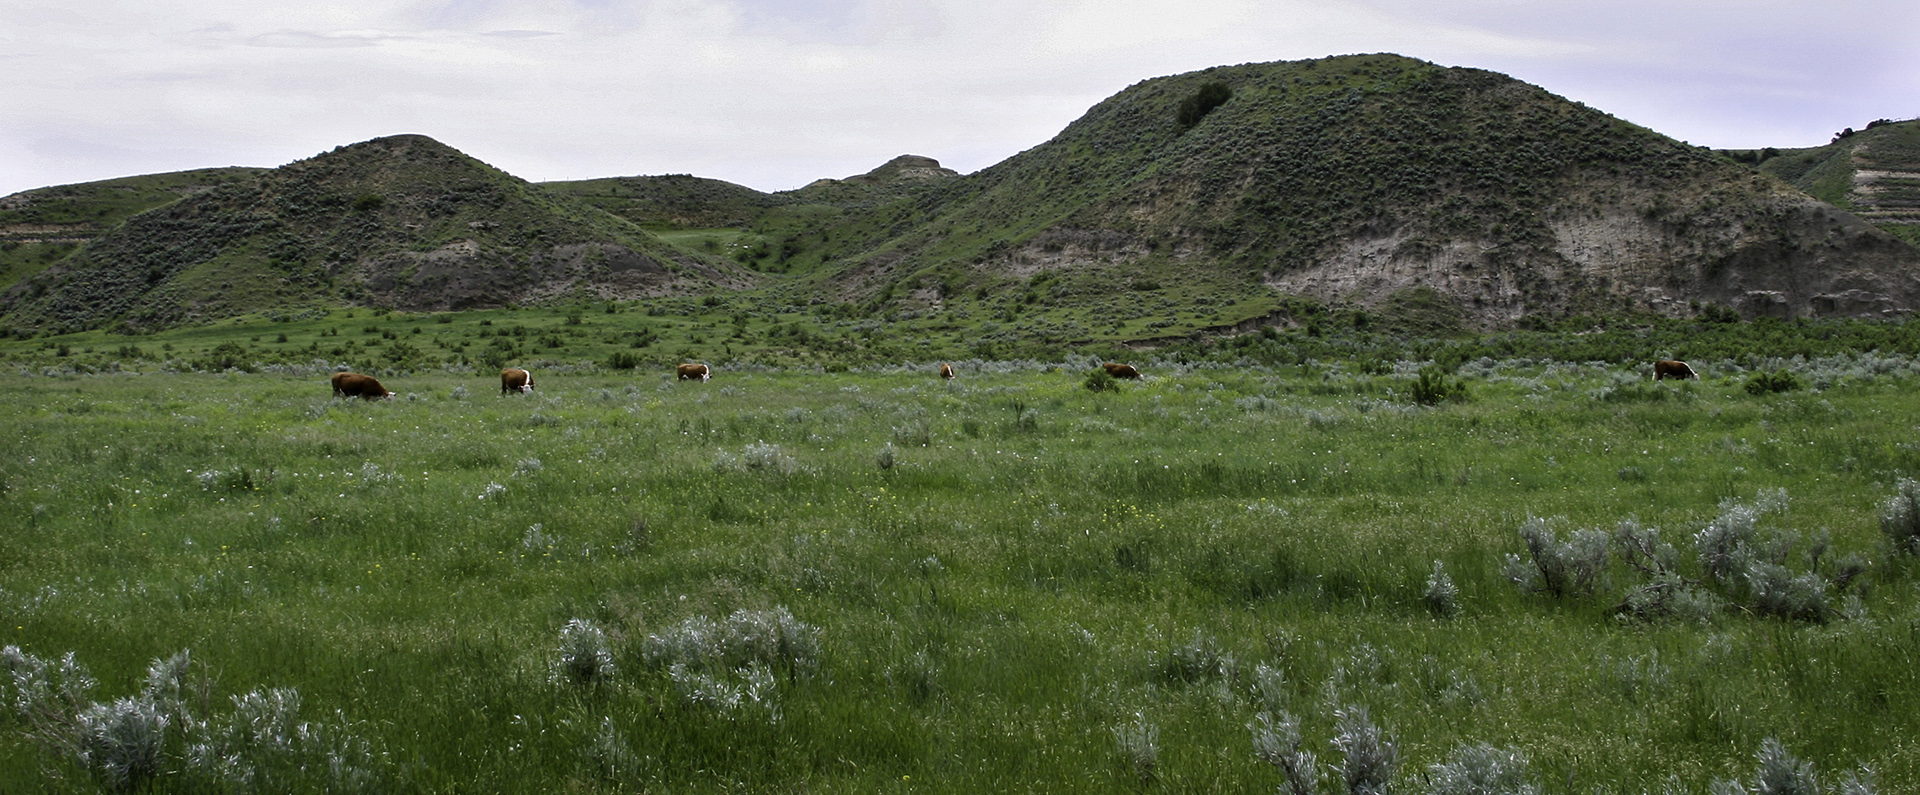 Hereford cattle grazing on a range in Montana 